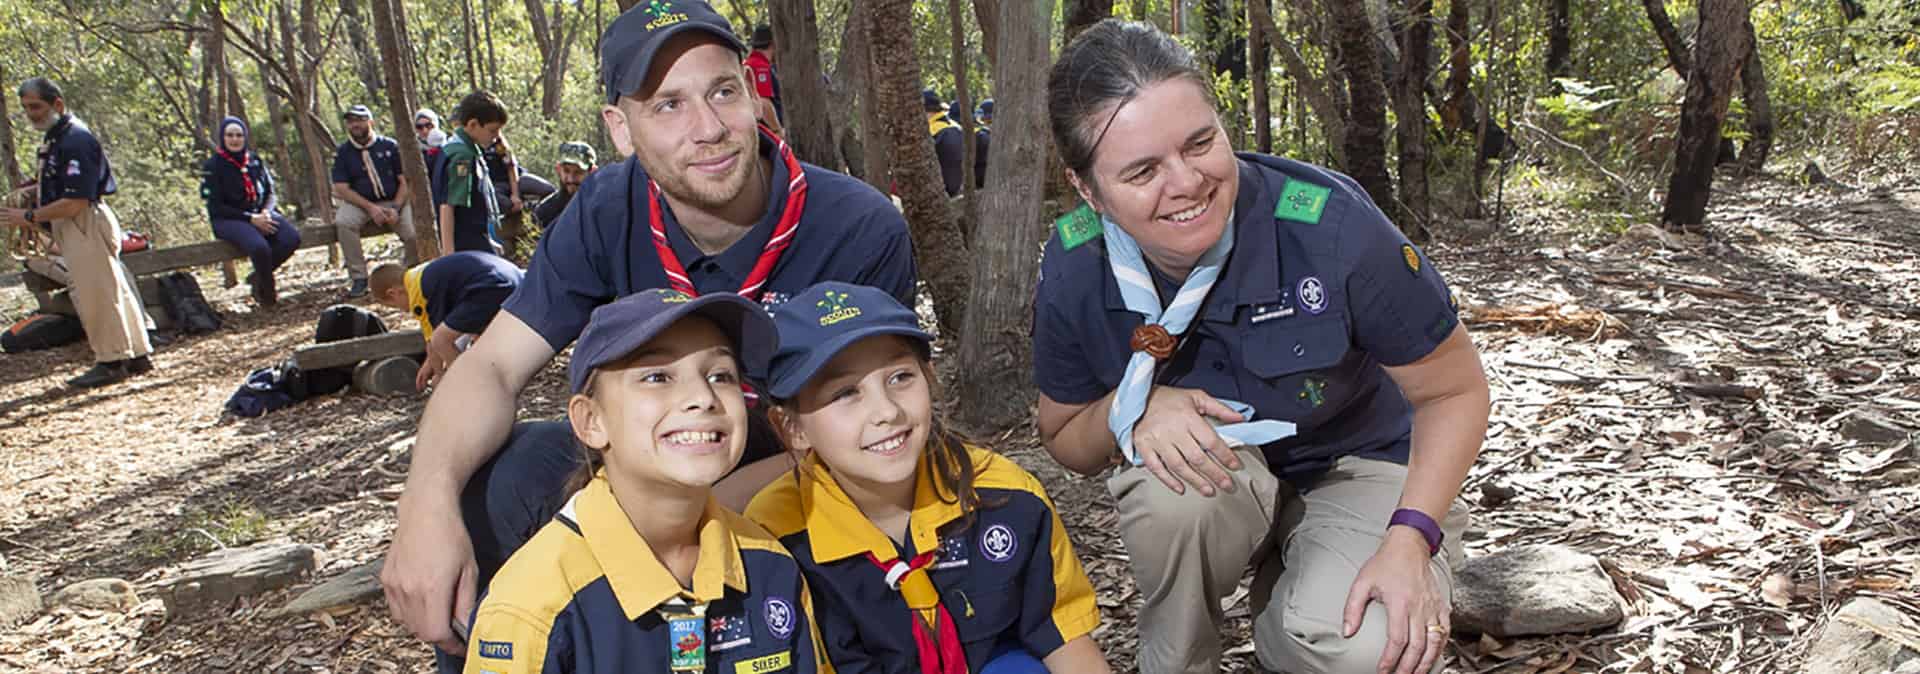 Leaders and Cubs at outdoors event